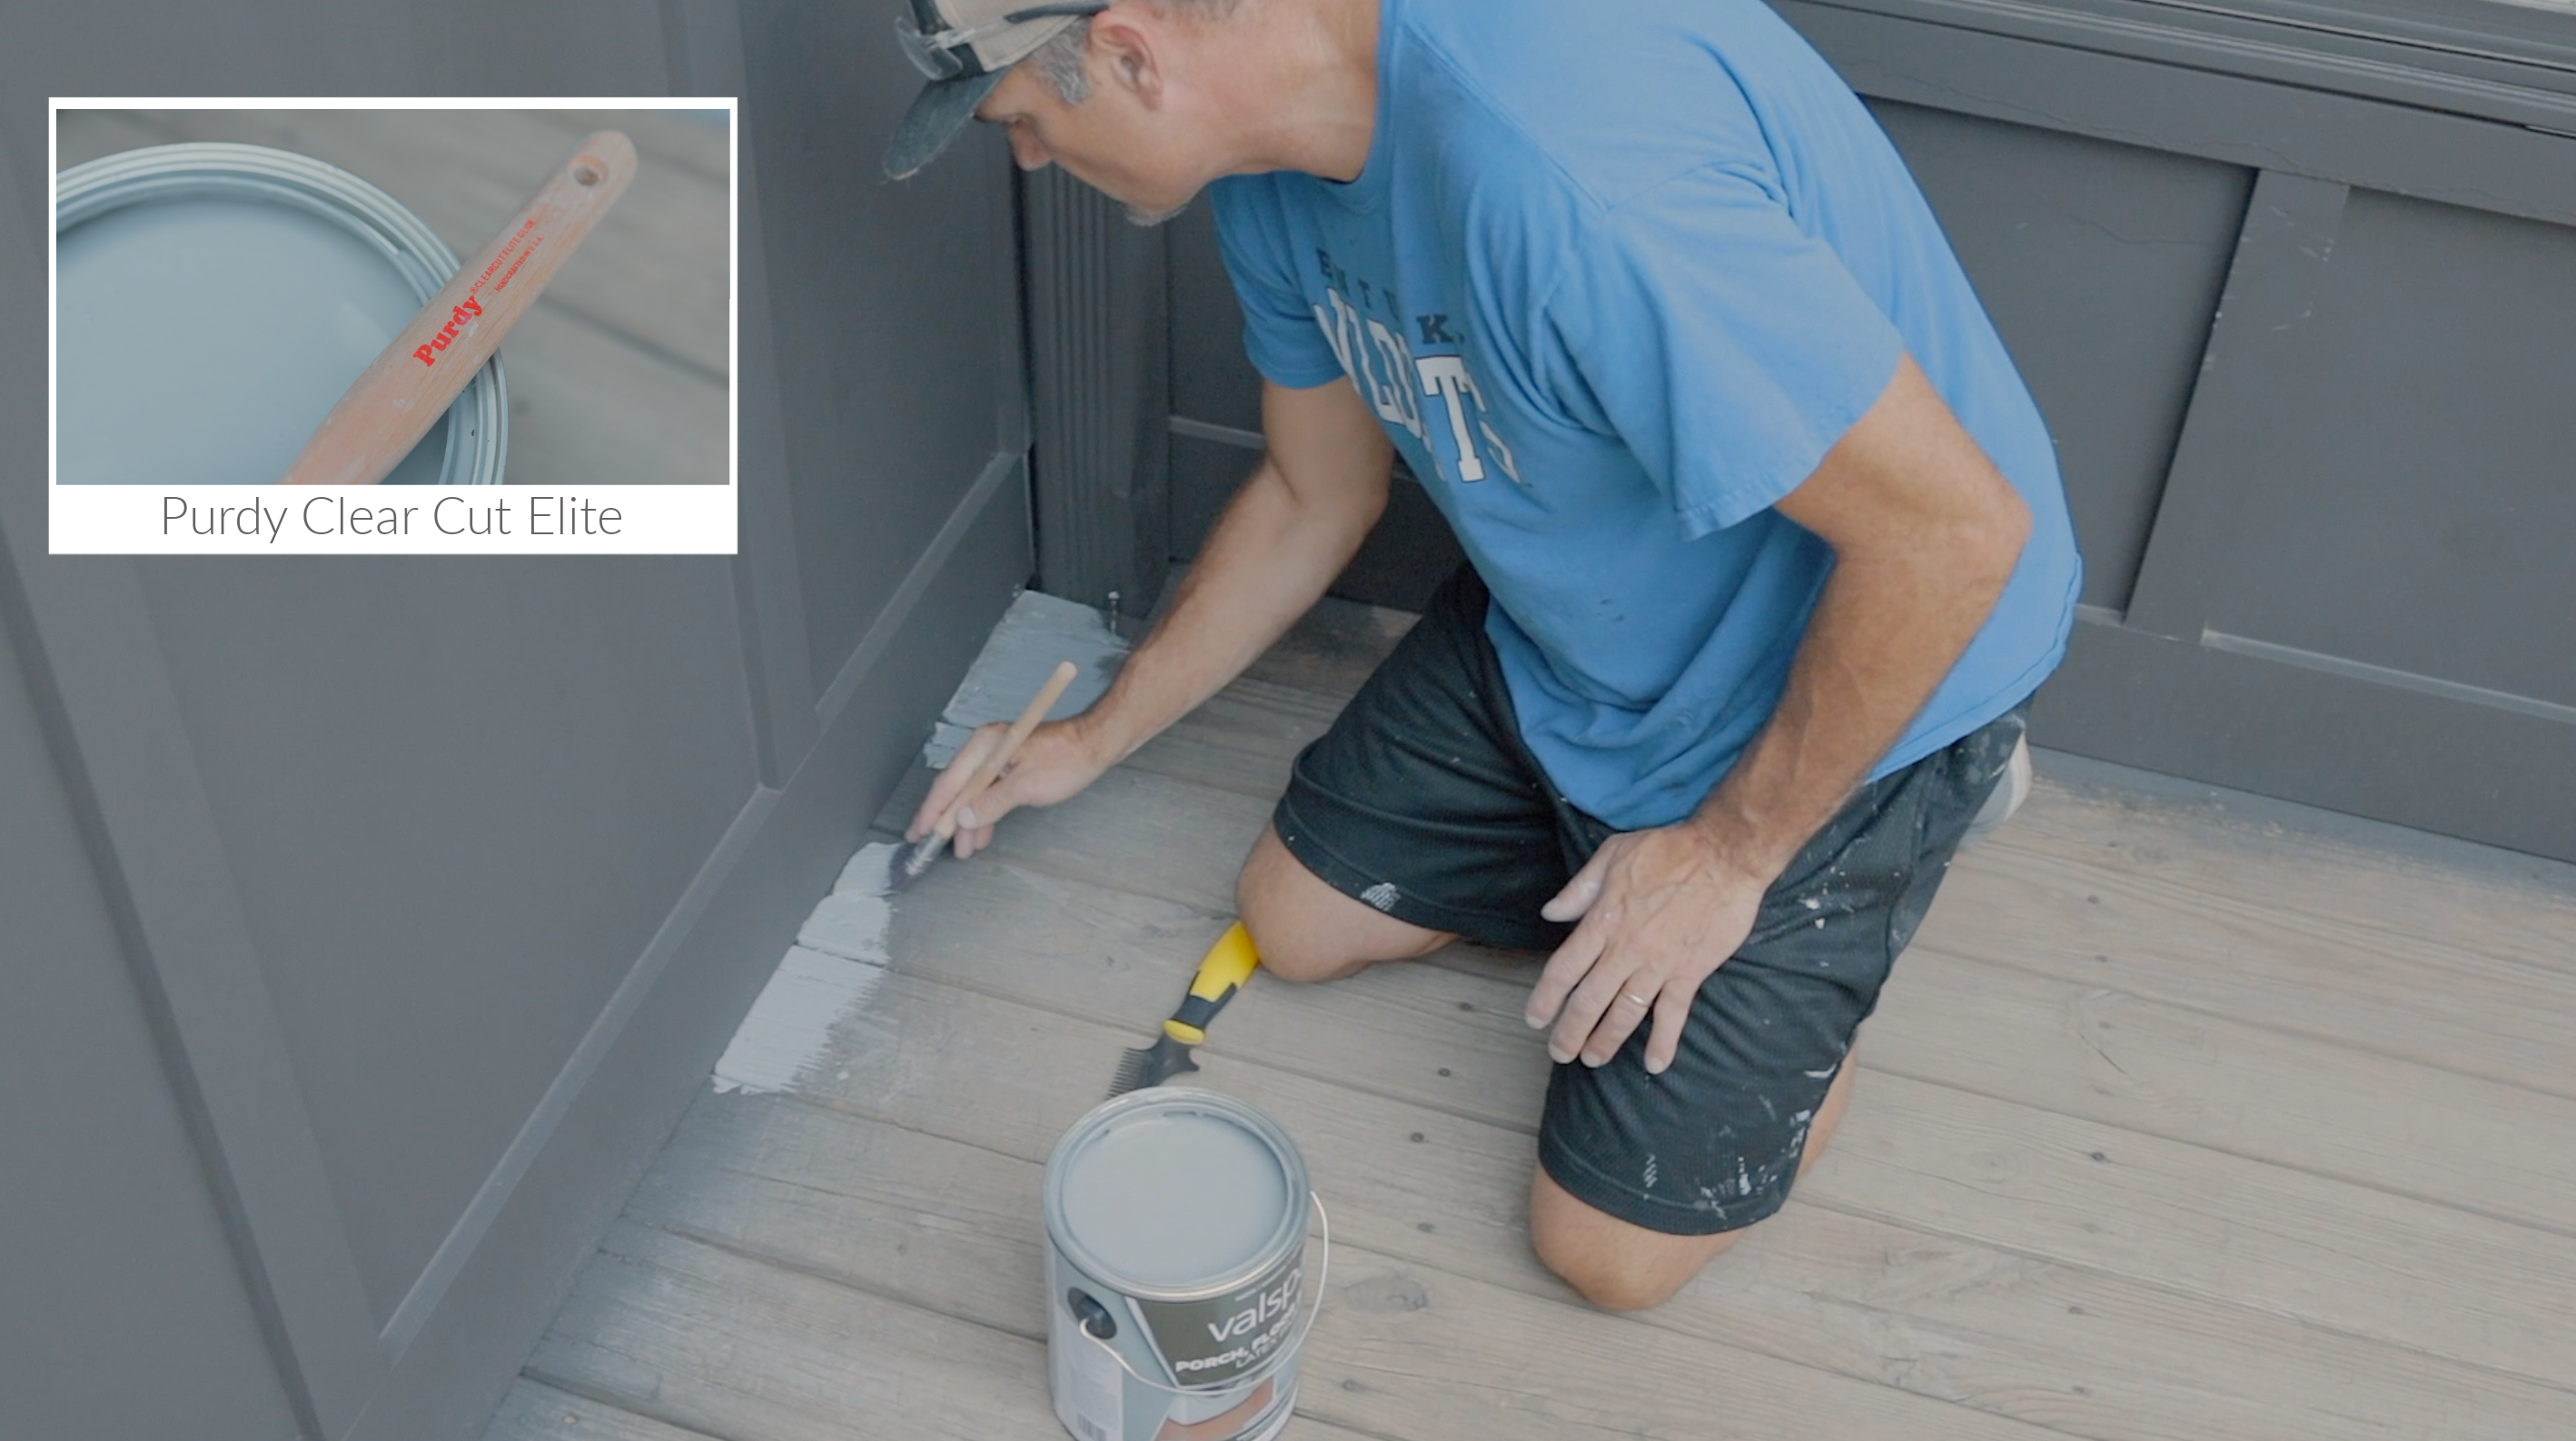 How to Update Your Concrete Patio or Wood Deck with Paint